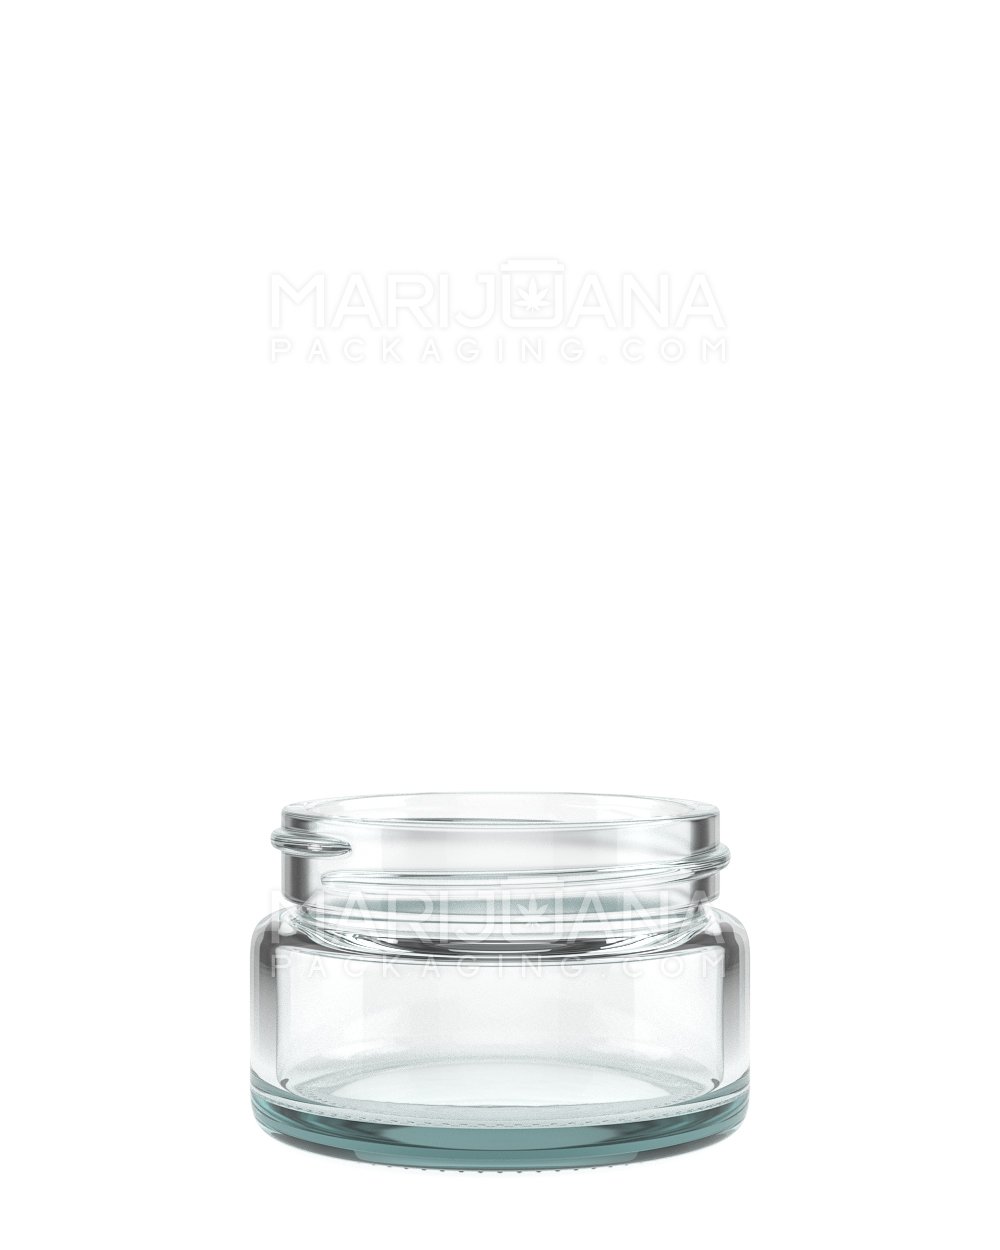 Straight Sided Clear Glass Jars | 50mm - 1oz | Sample - 1